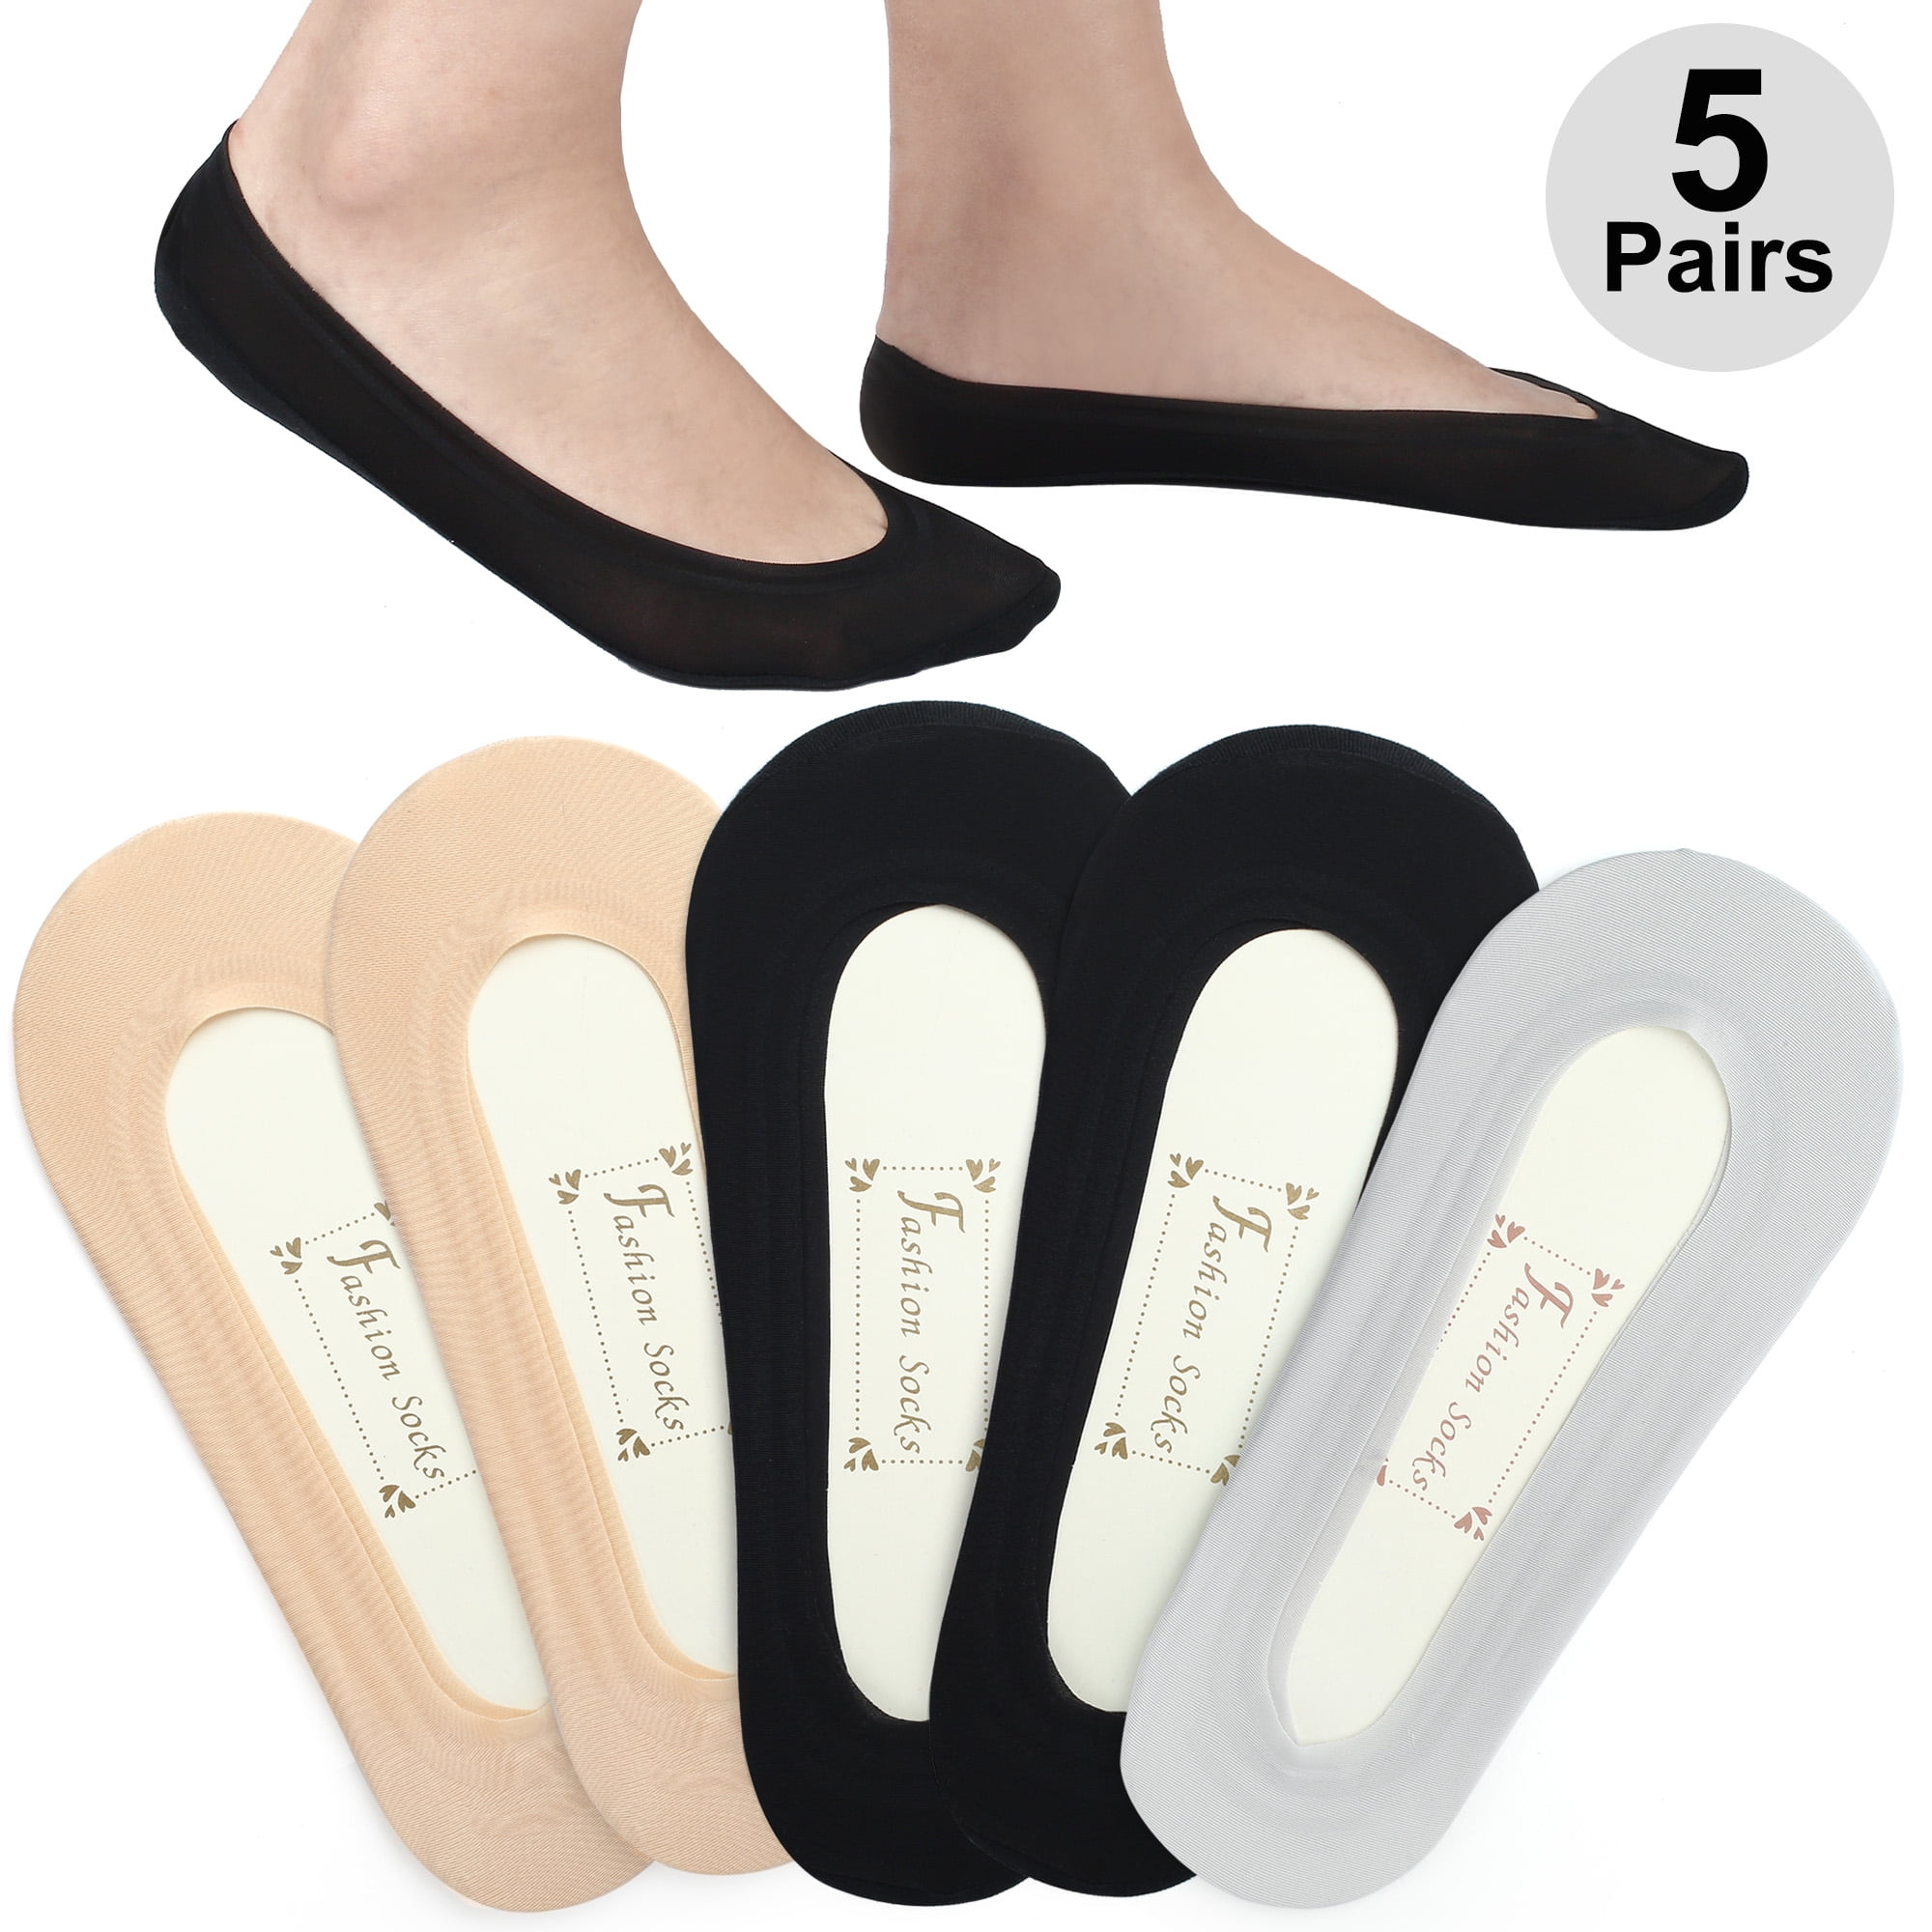 5 Pairs Women No Show Ankle Invisible Nonslip Loafer Boat Liner Cotton Socks NEW 